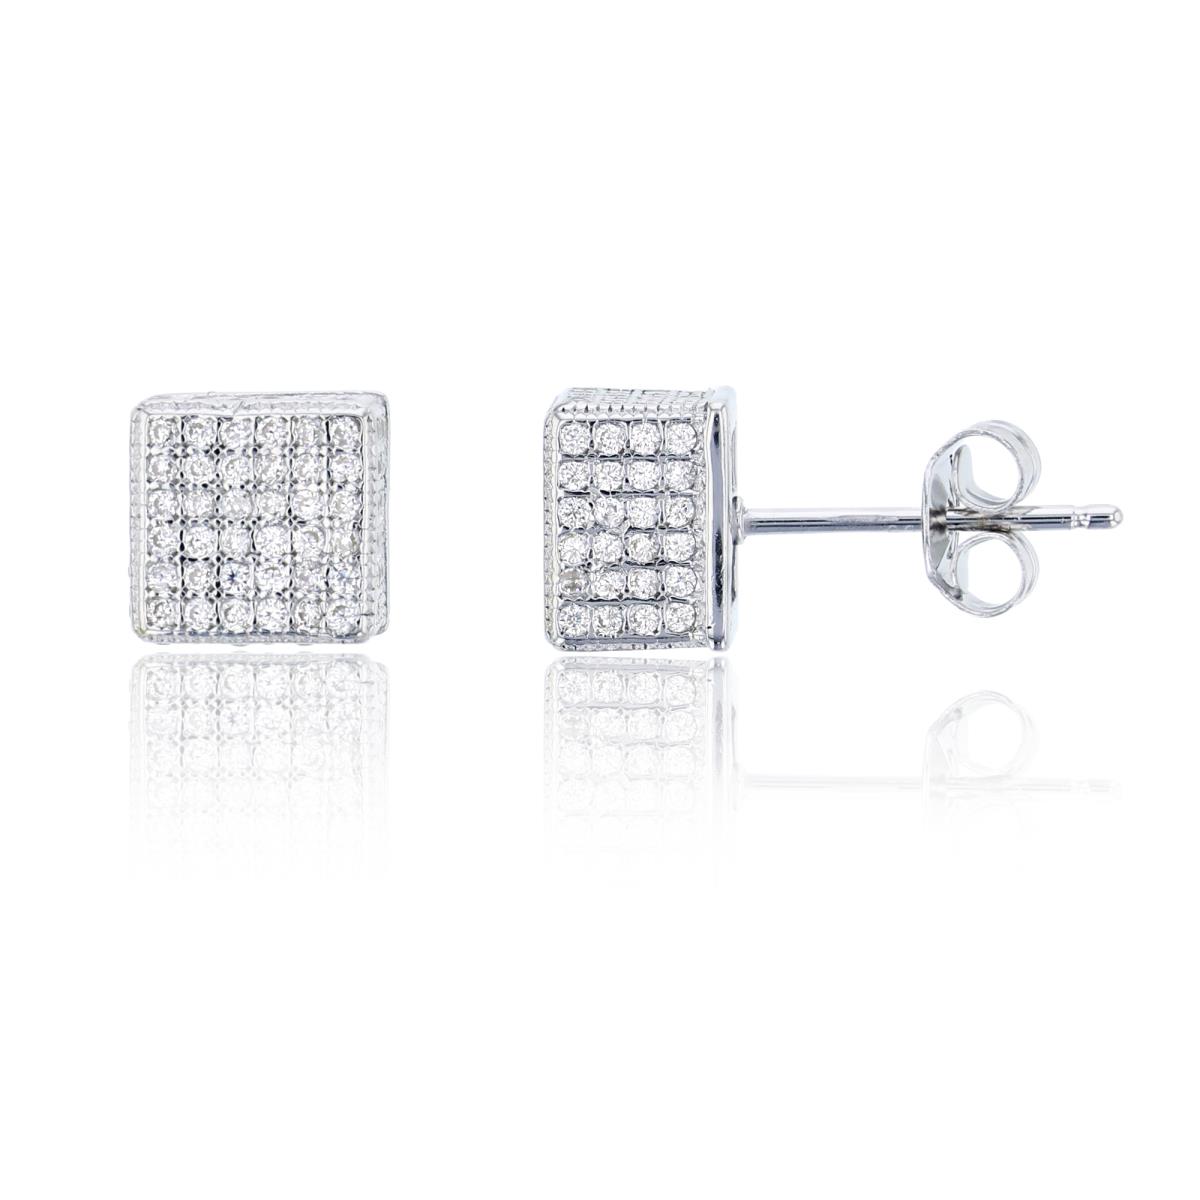 Sterling Silver 8x8mm Micropave Square 3D Stud Earring